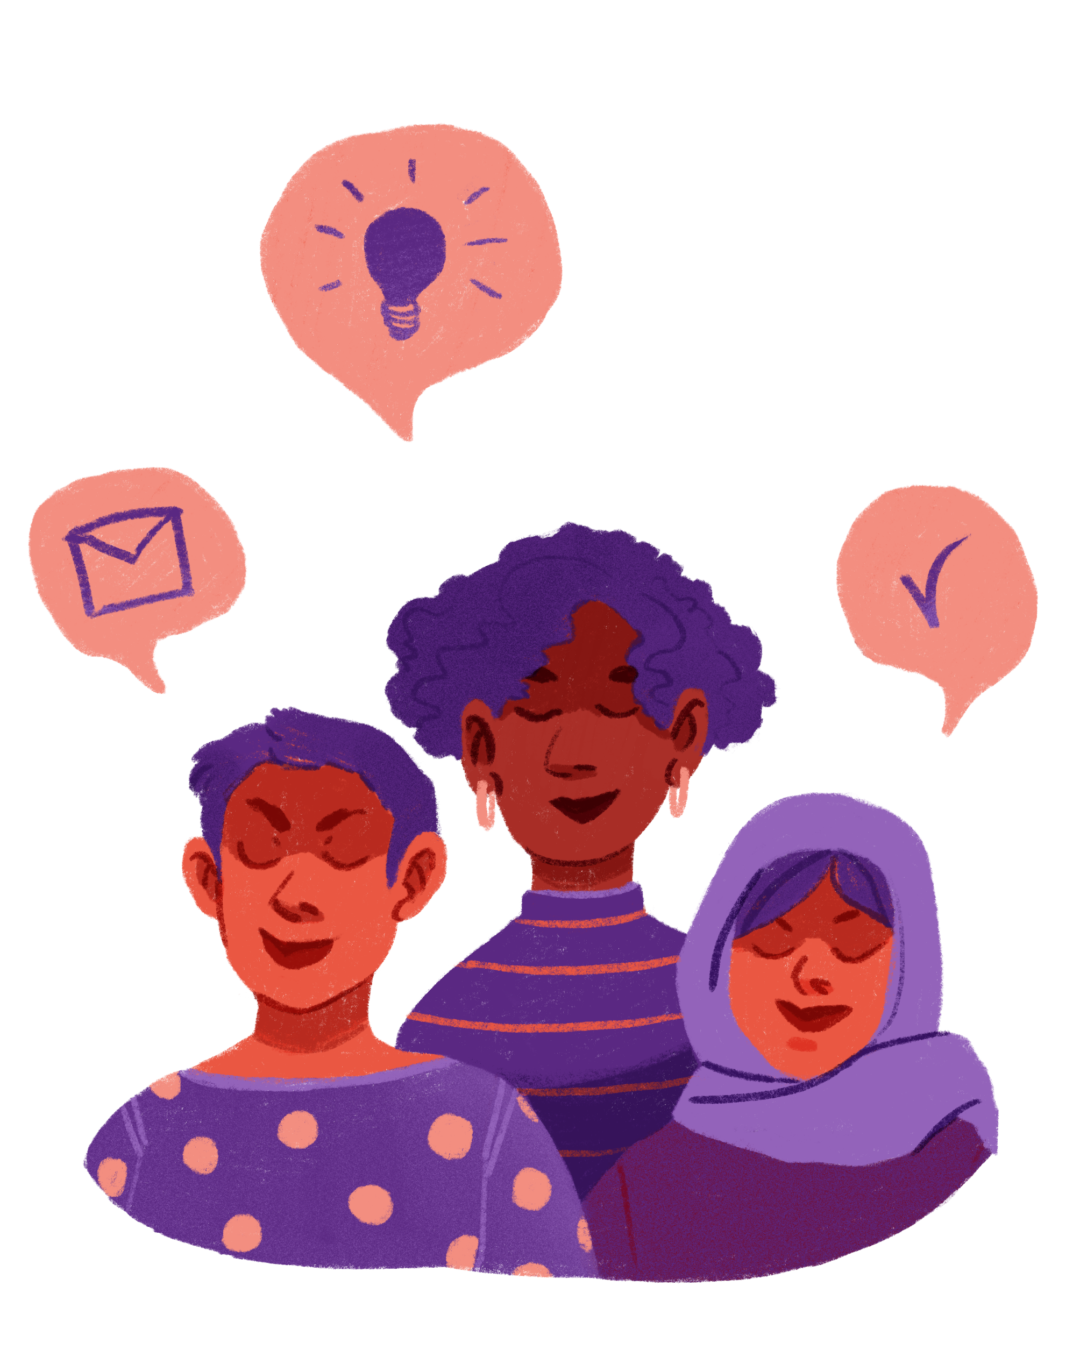 illustration in red and purple of three women/nonbinary persons with closed eyes speech bubbles with lightbulb icon, envelope icon and check mark icon above their heads